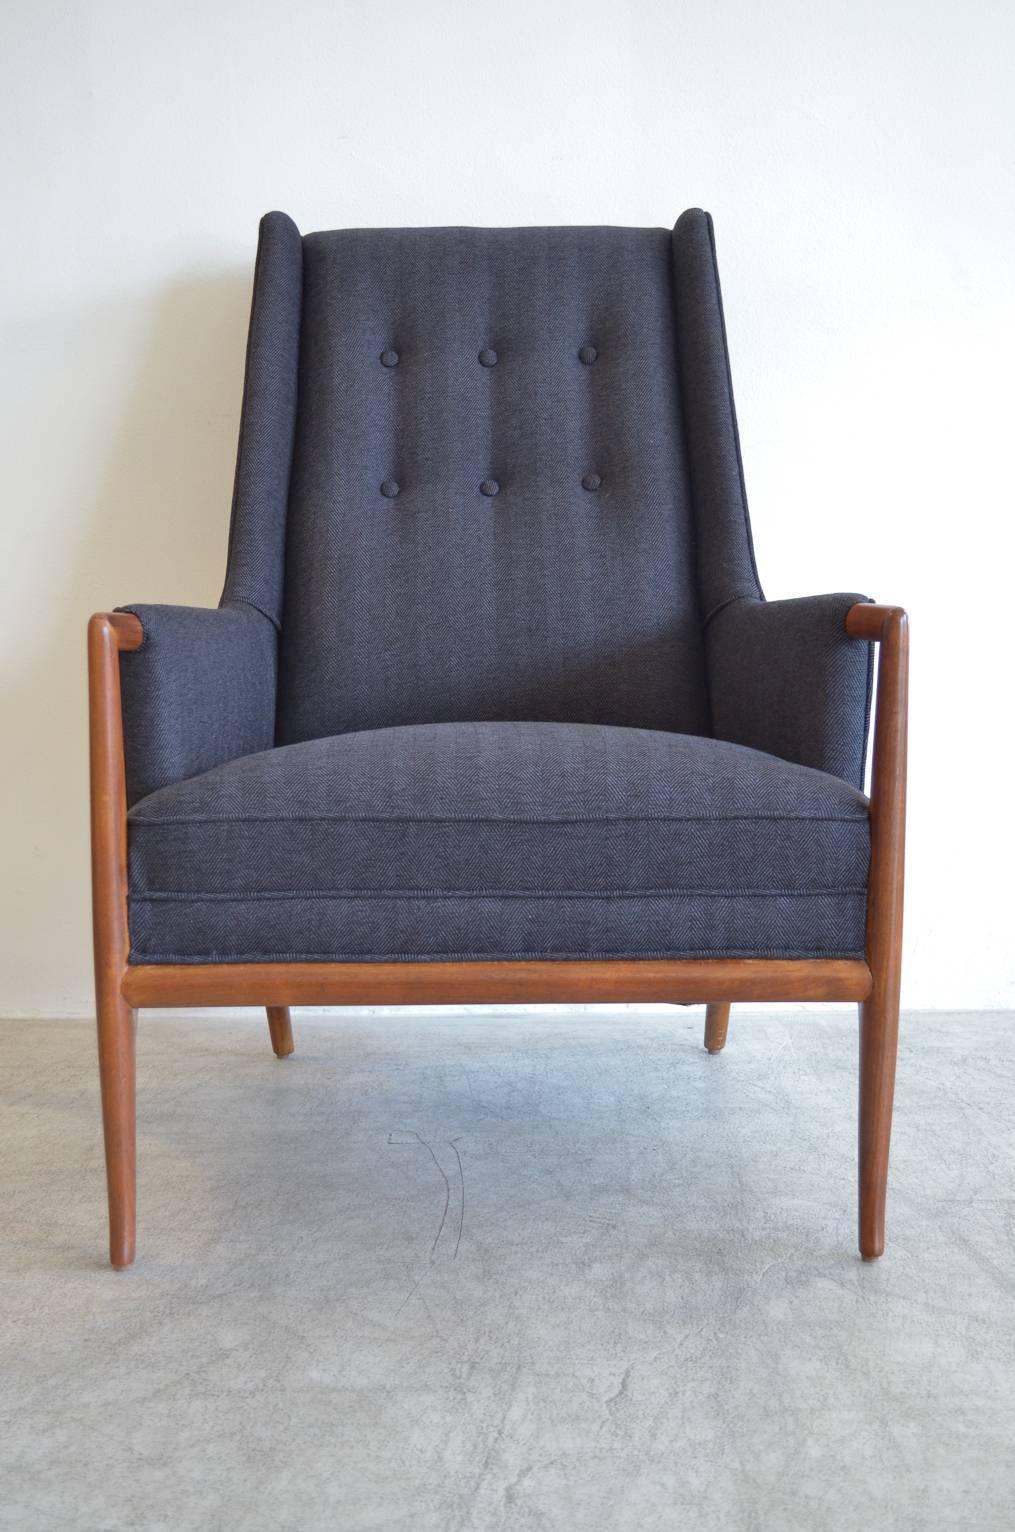 Elegant Robsjohn-Gibbings highback lounge chair with a beautiful exposed walnut frame and armrest. Highly desirable saber leg design, extremely comfortable and elegant. Fully restored in showroom condition with new charcoal grey herringbone wool